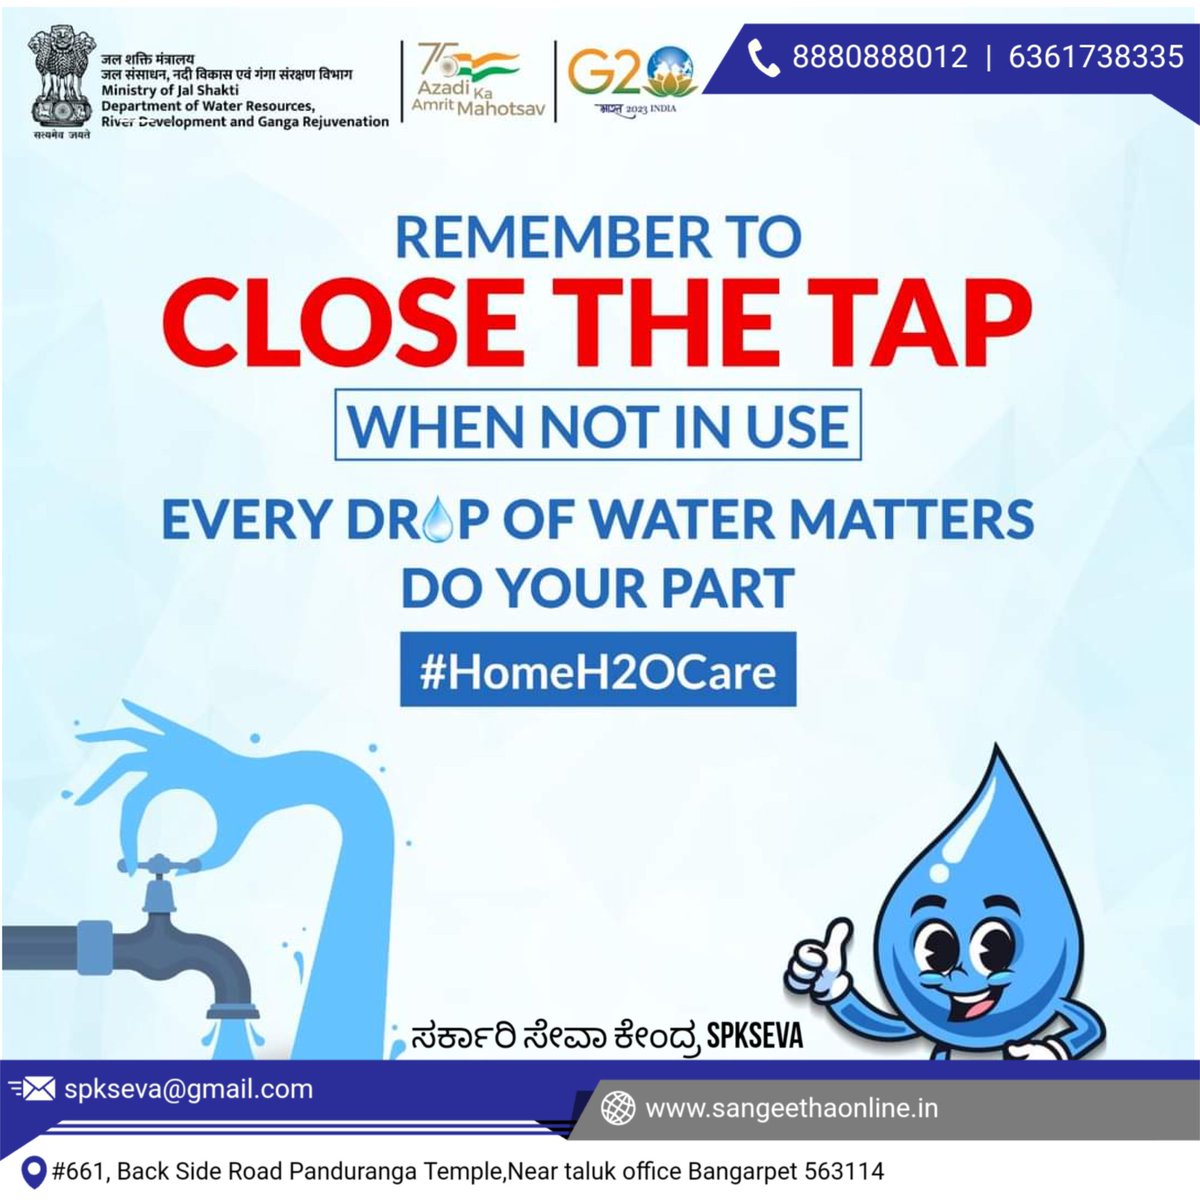 Every drop counts. Turn off the tap when you're not using it to #conservewater & and protect our planet.
#SaveWater #ConserveForTomorrow #HomeH2oCare #WaterConservation #saveeverydrop💧 #csc #gst #voterregistration #cyber #bankloan #trademarks #flightticket #GramaOne #horoscope